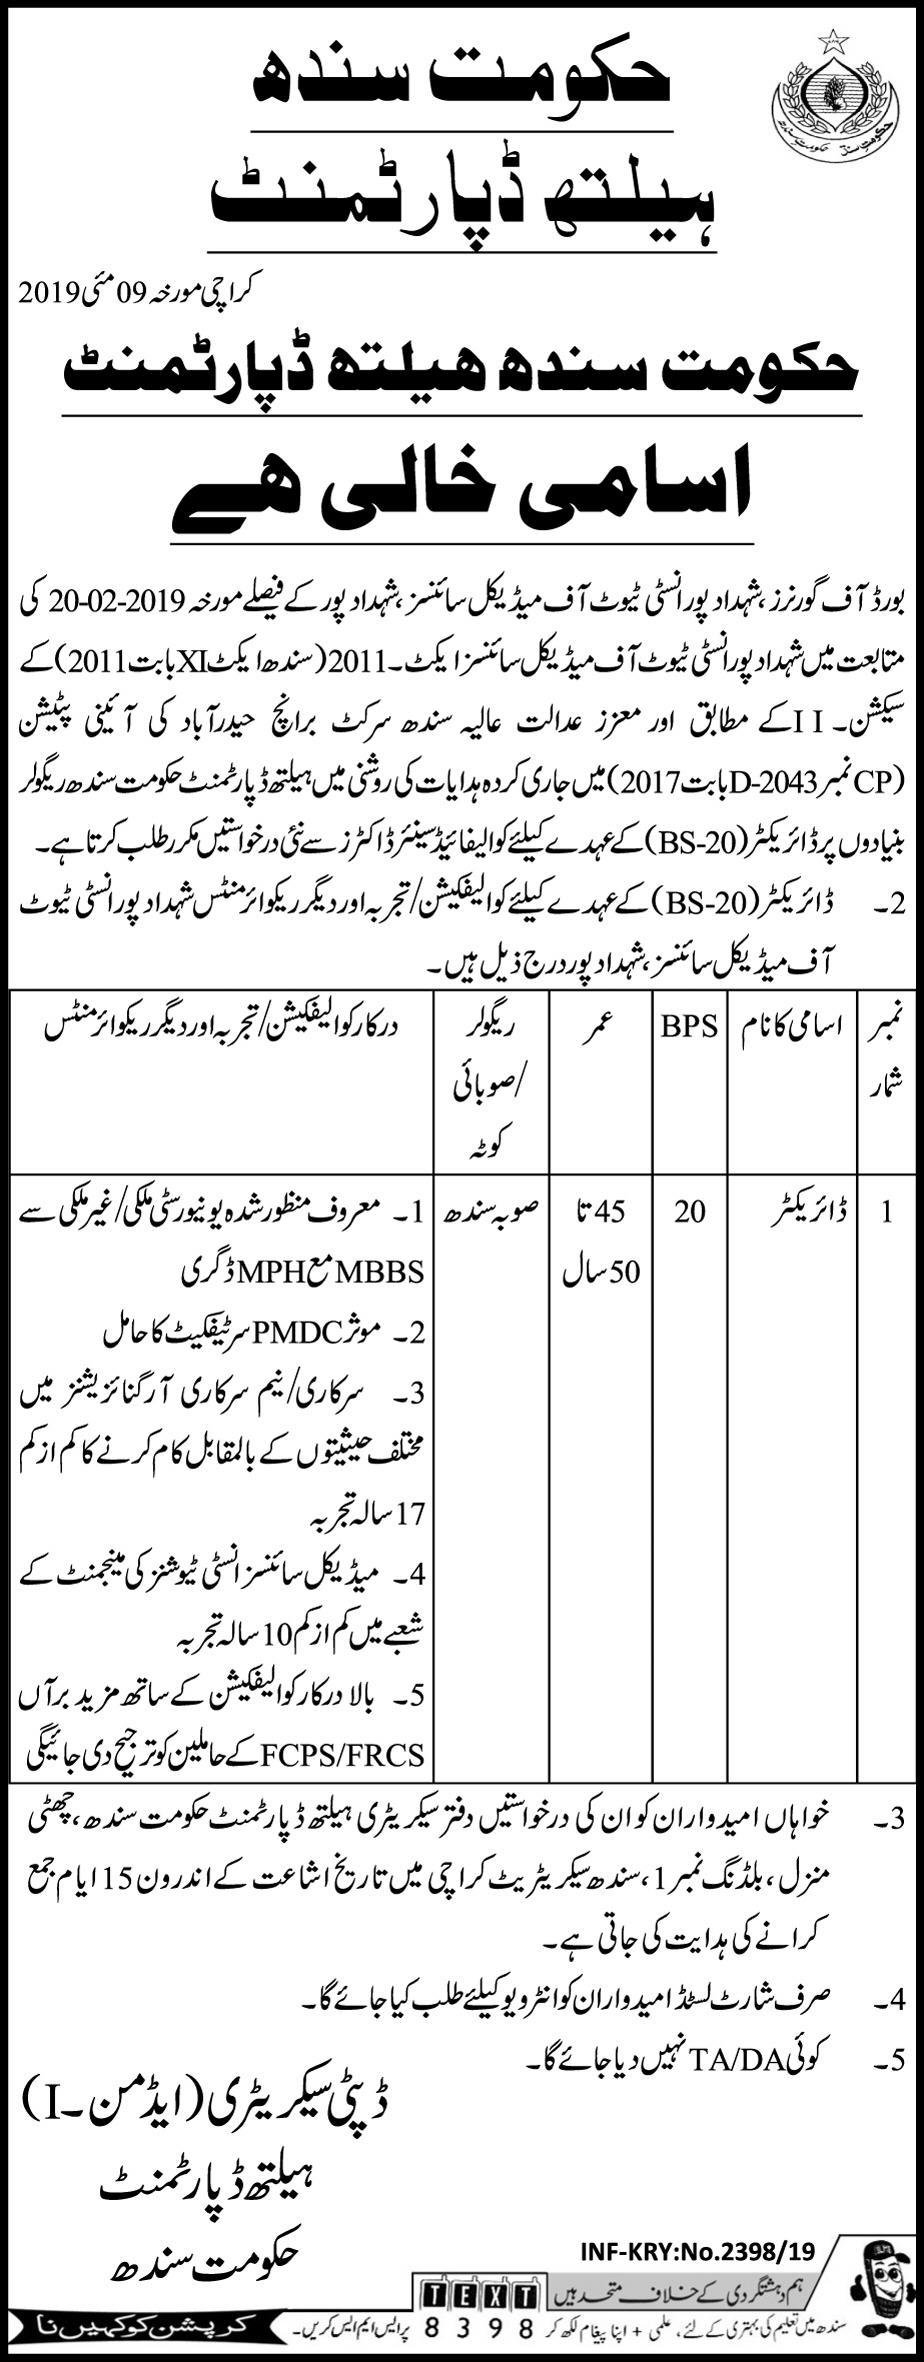 Get a Latest Jobs in Health Department of Sindh 2019